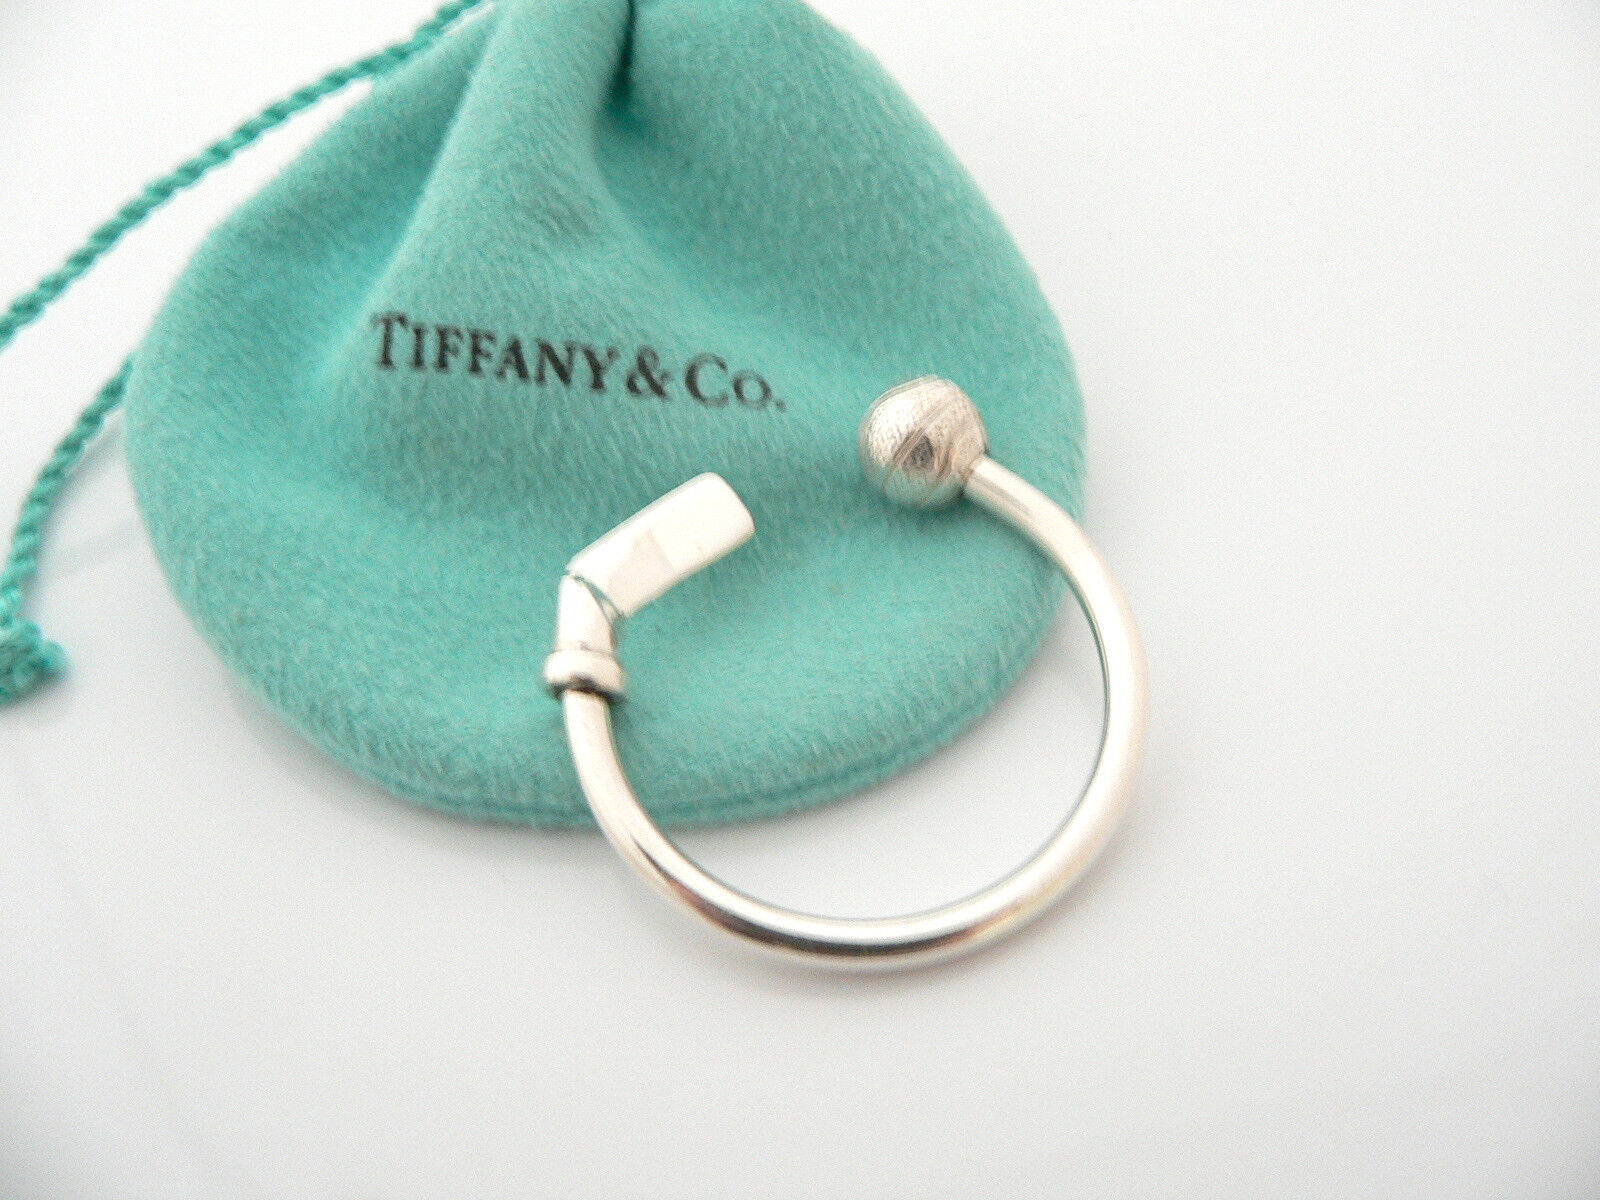 Tiffany & Co Silver Basketball Ball Key Ring Keychain Sports Lover Gift Pouch - $368.00